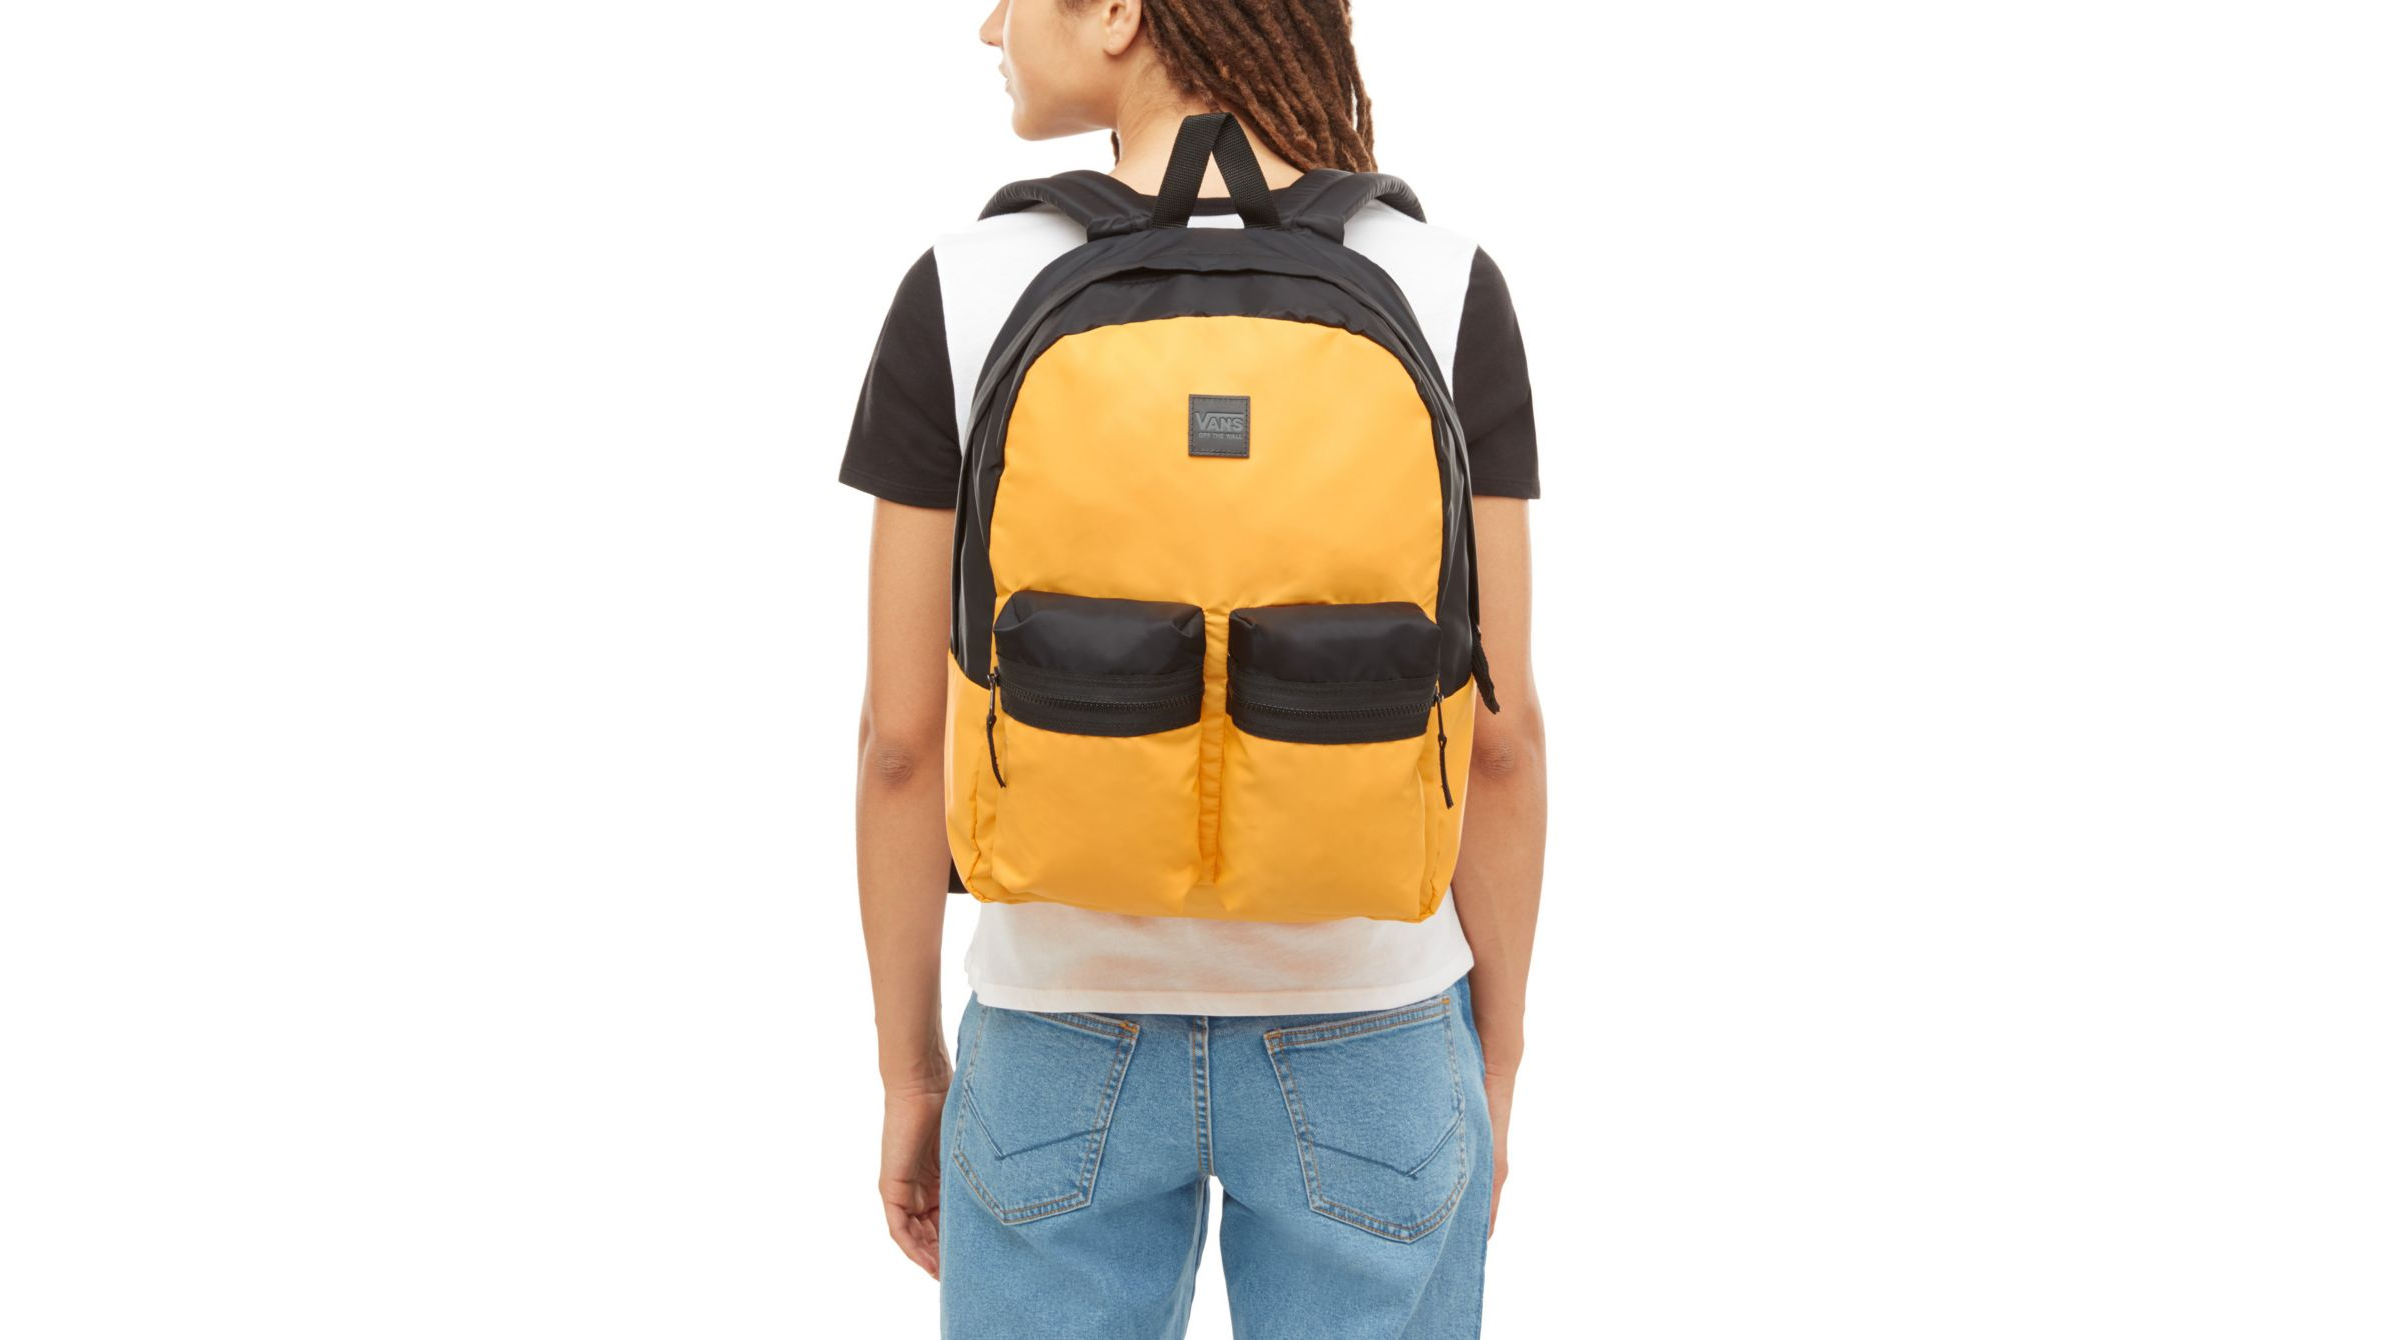 how much do vans backpacks cost